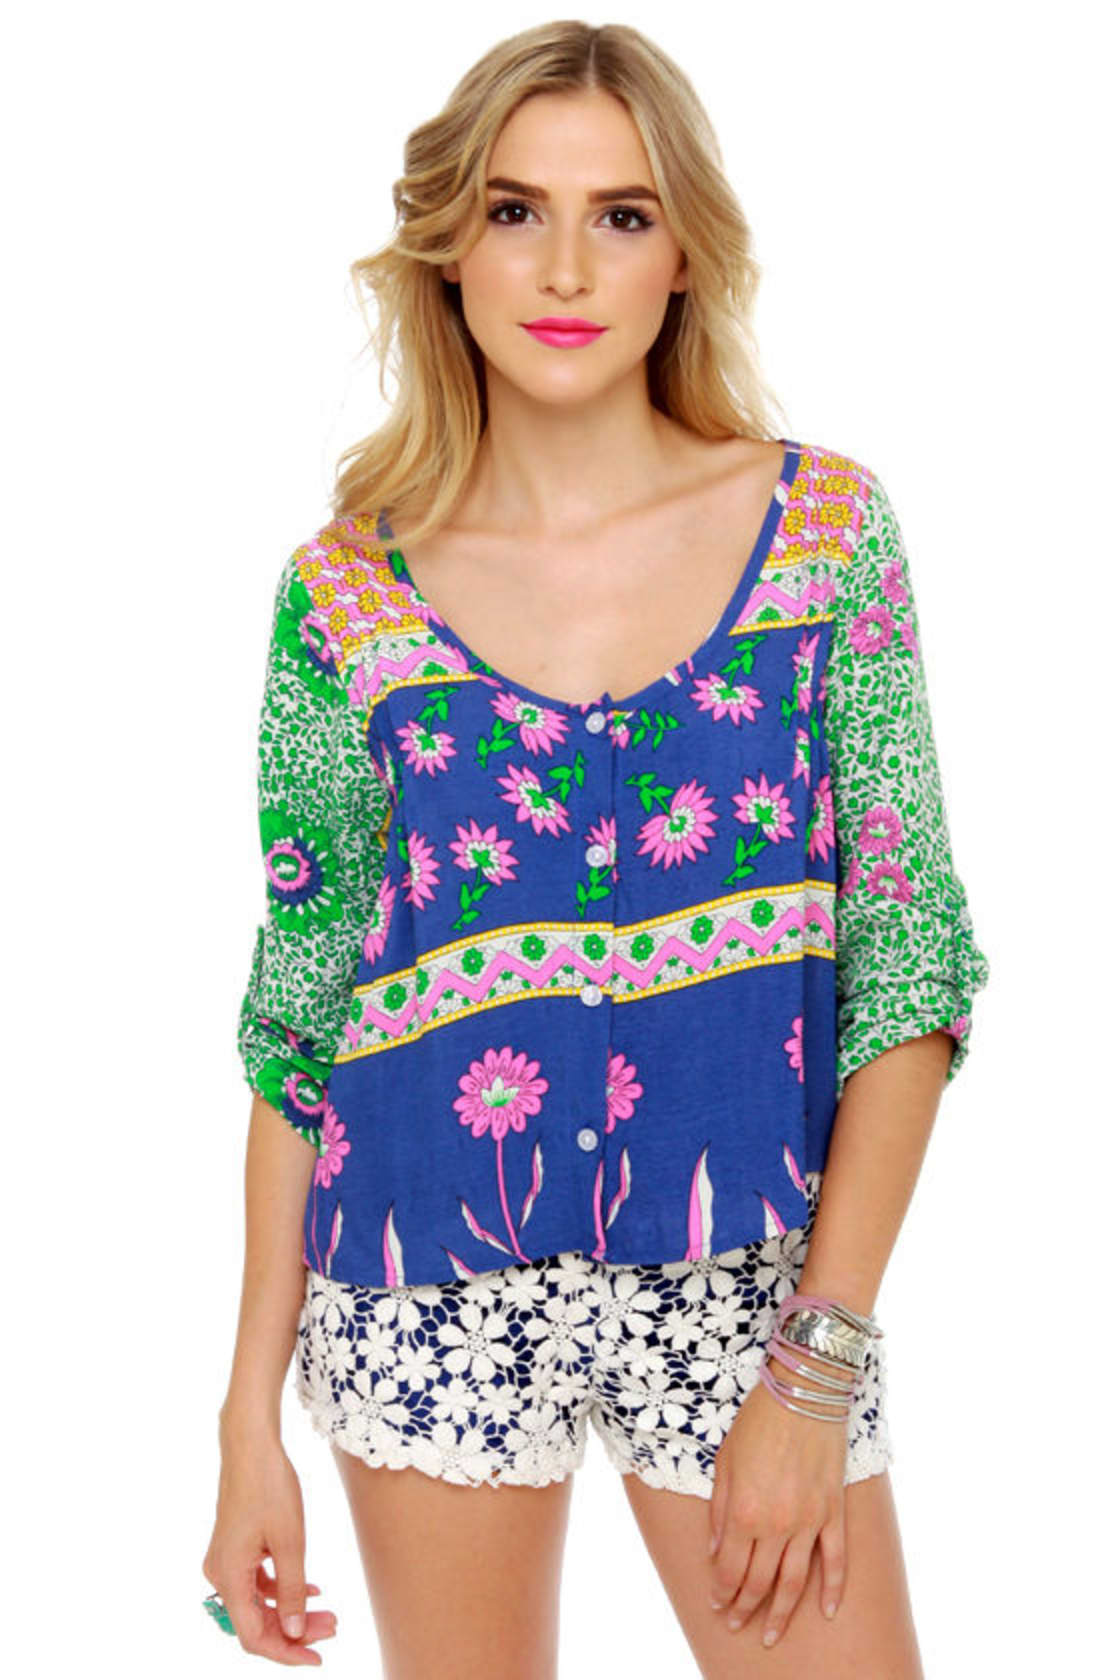 Lucy Love Marlow Top - Floral Print Top - $50.00 - Lulus